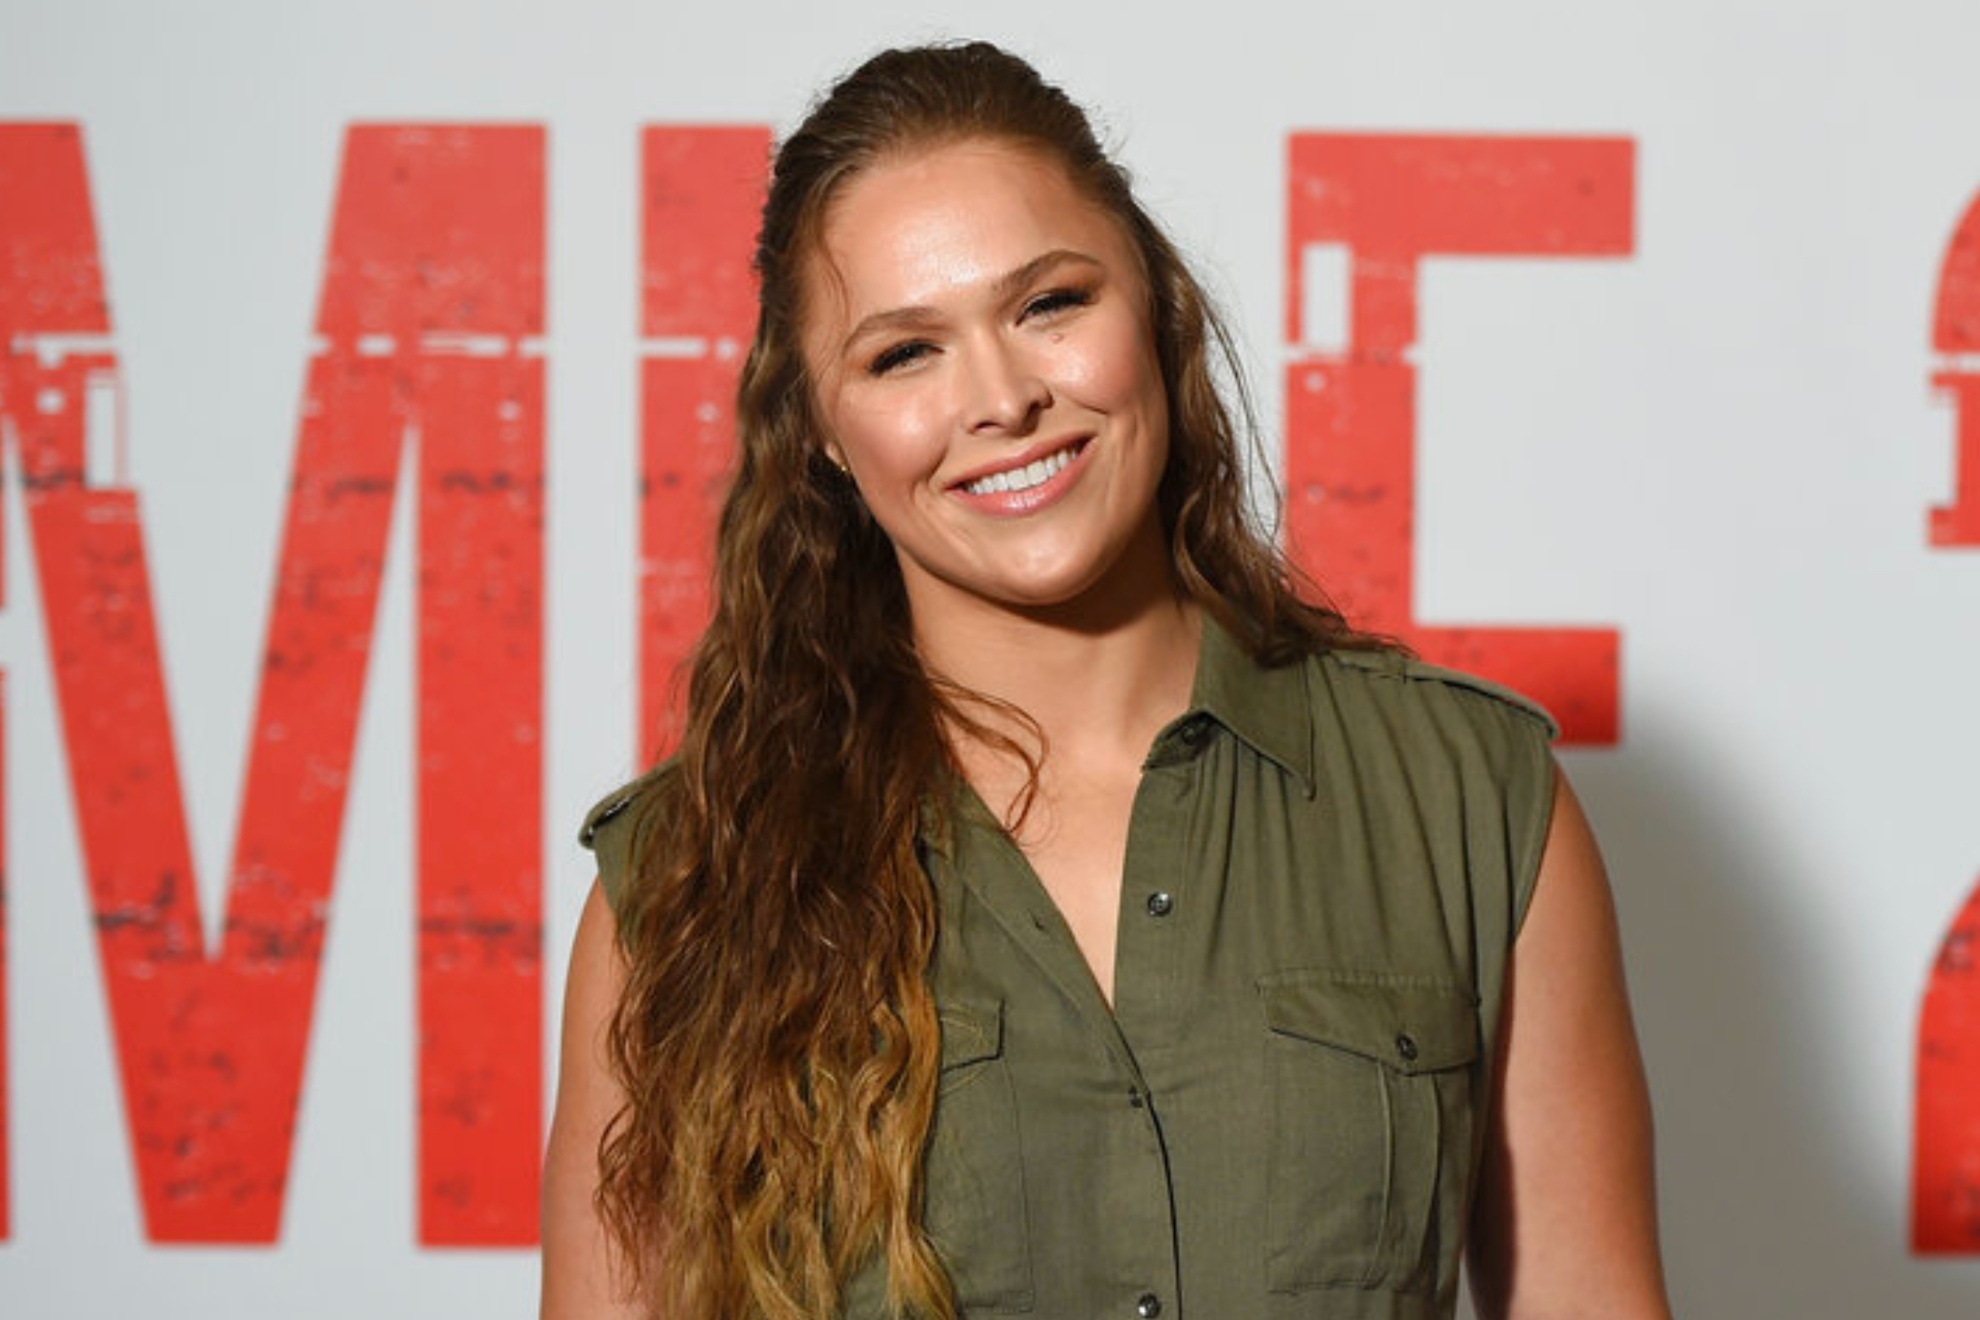 Ronda Rousey spoke out against former WWE chairman Vince McMahon